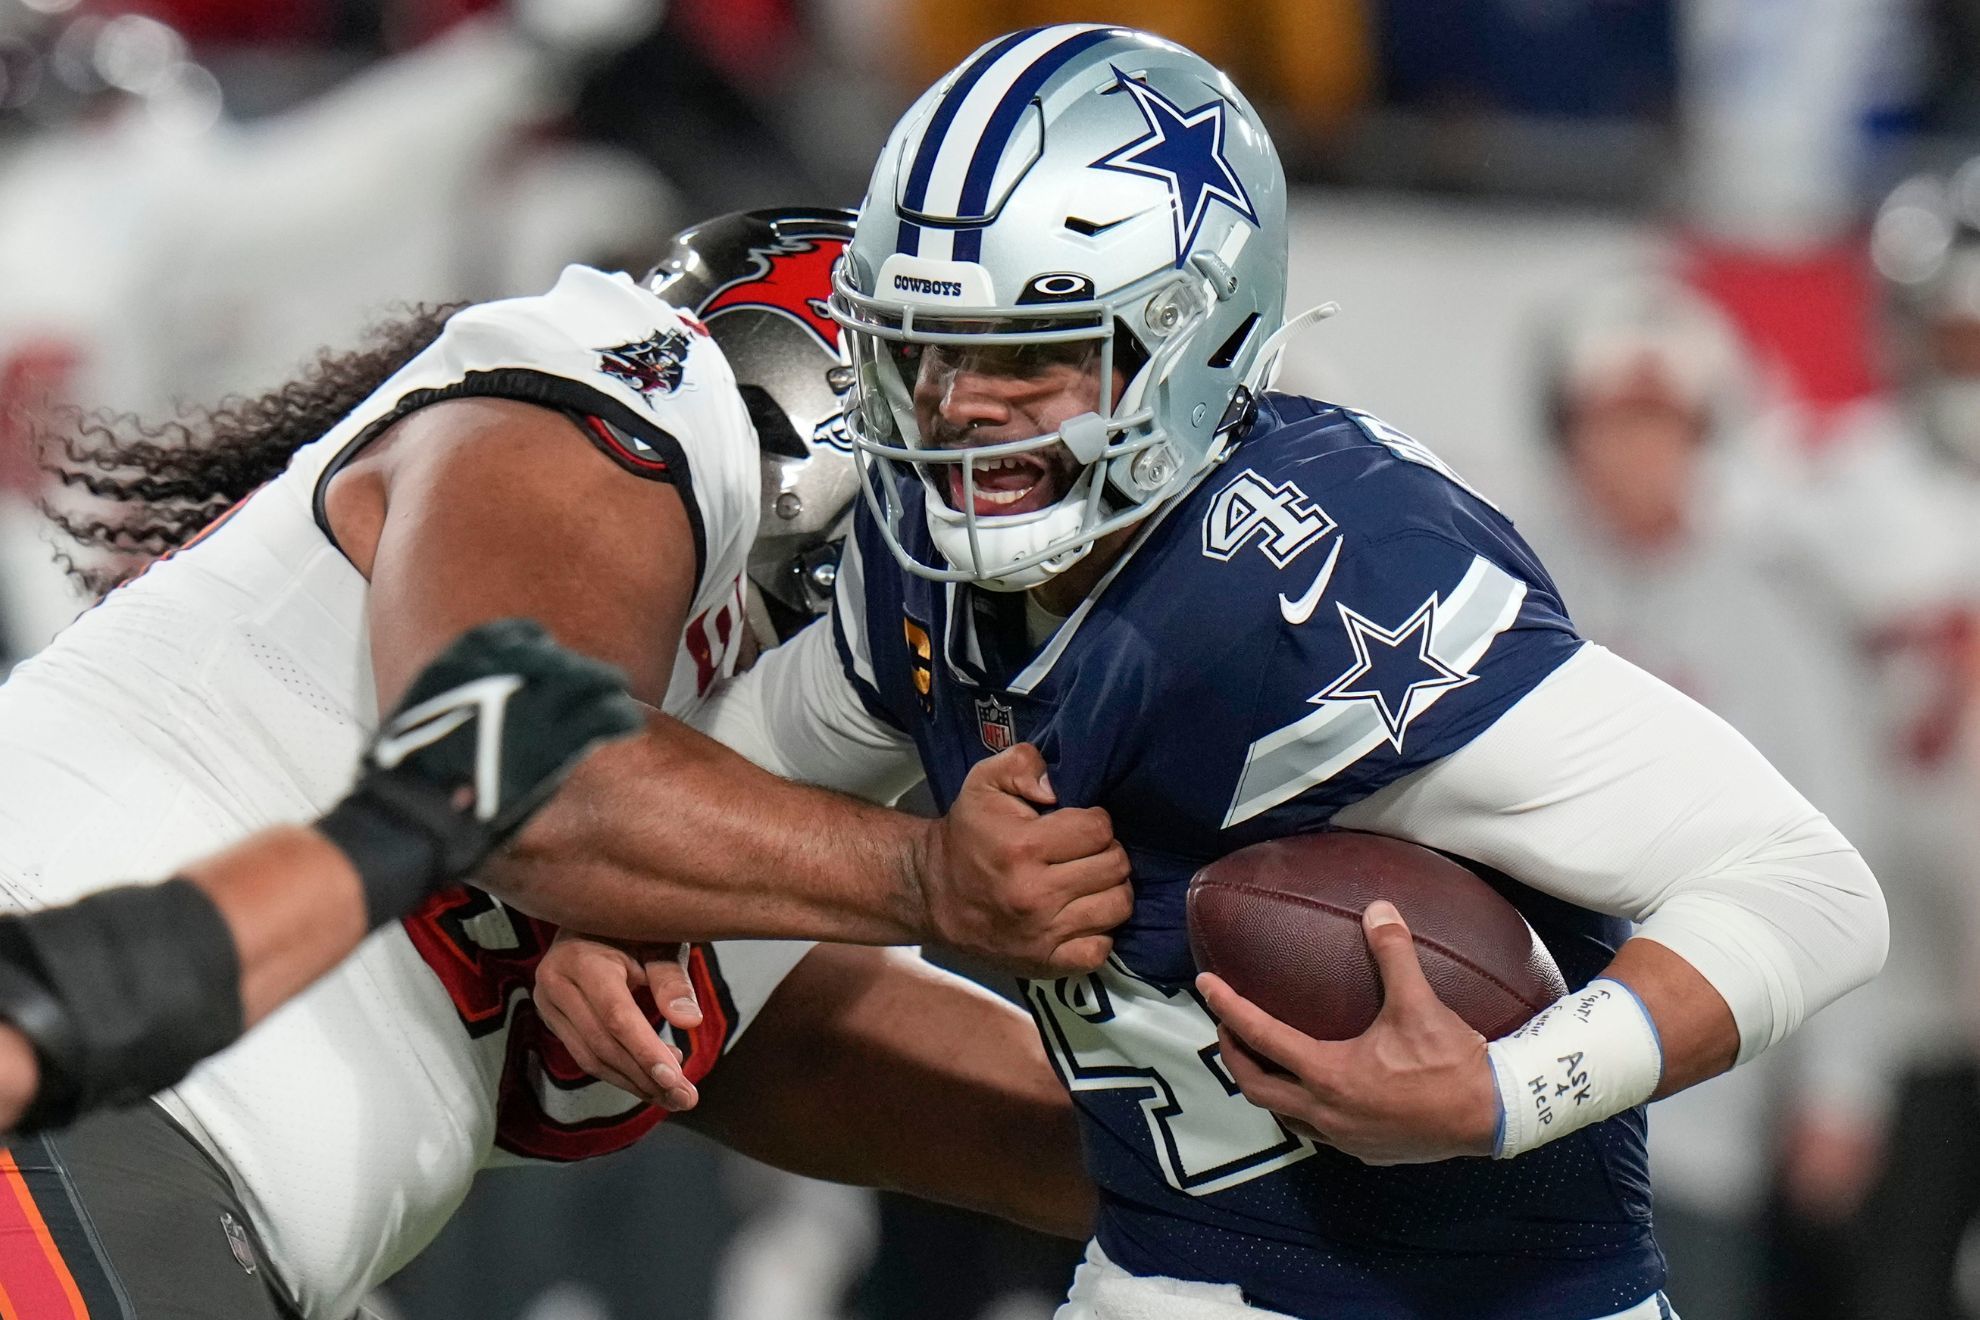 Dak Prescott threw four touchdown passes and rushed for another